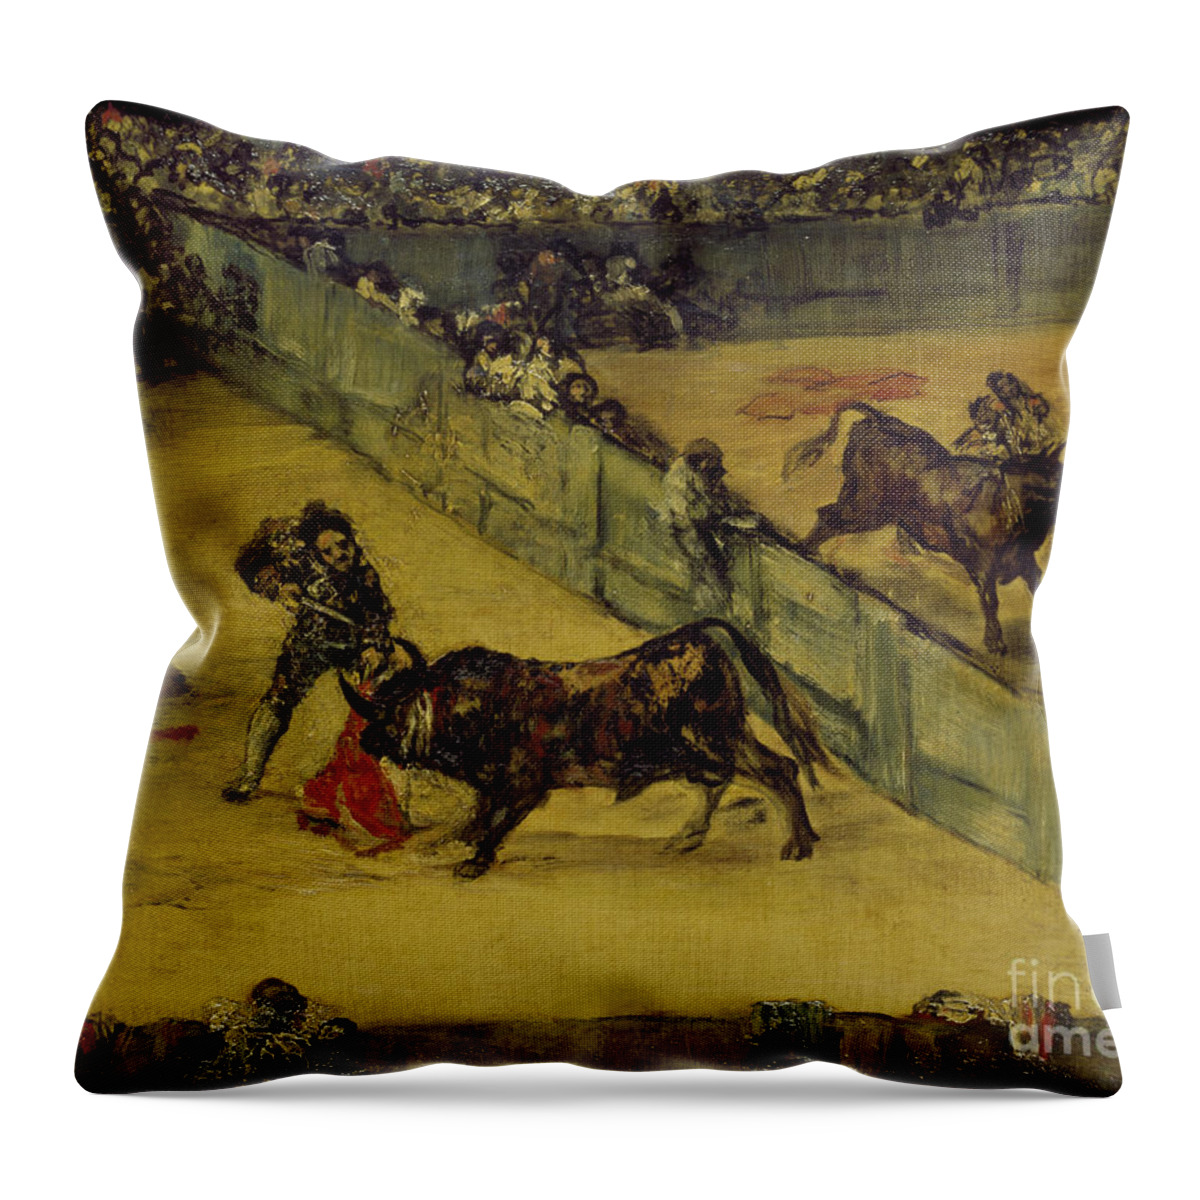 Goya Throw Pillow featuring the painting Goya, Scene At A Bullfight The Divided Ring, 18th Century by Francisco Goya